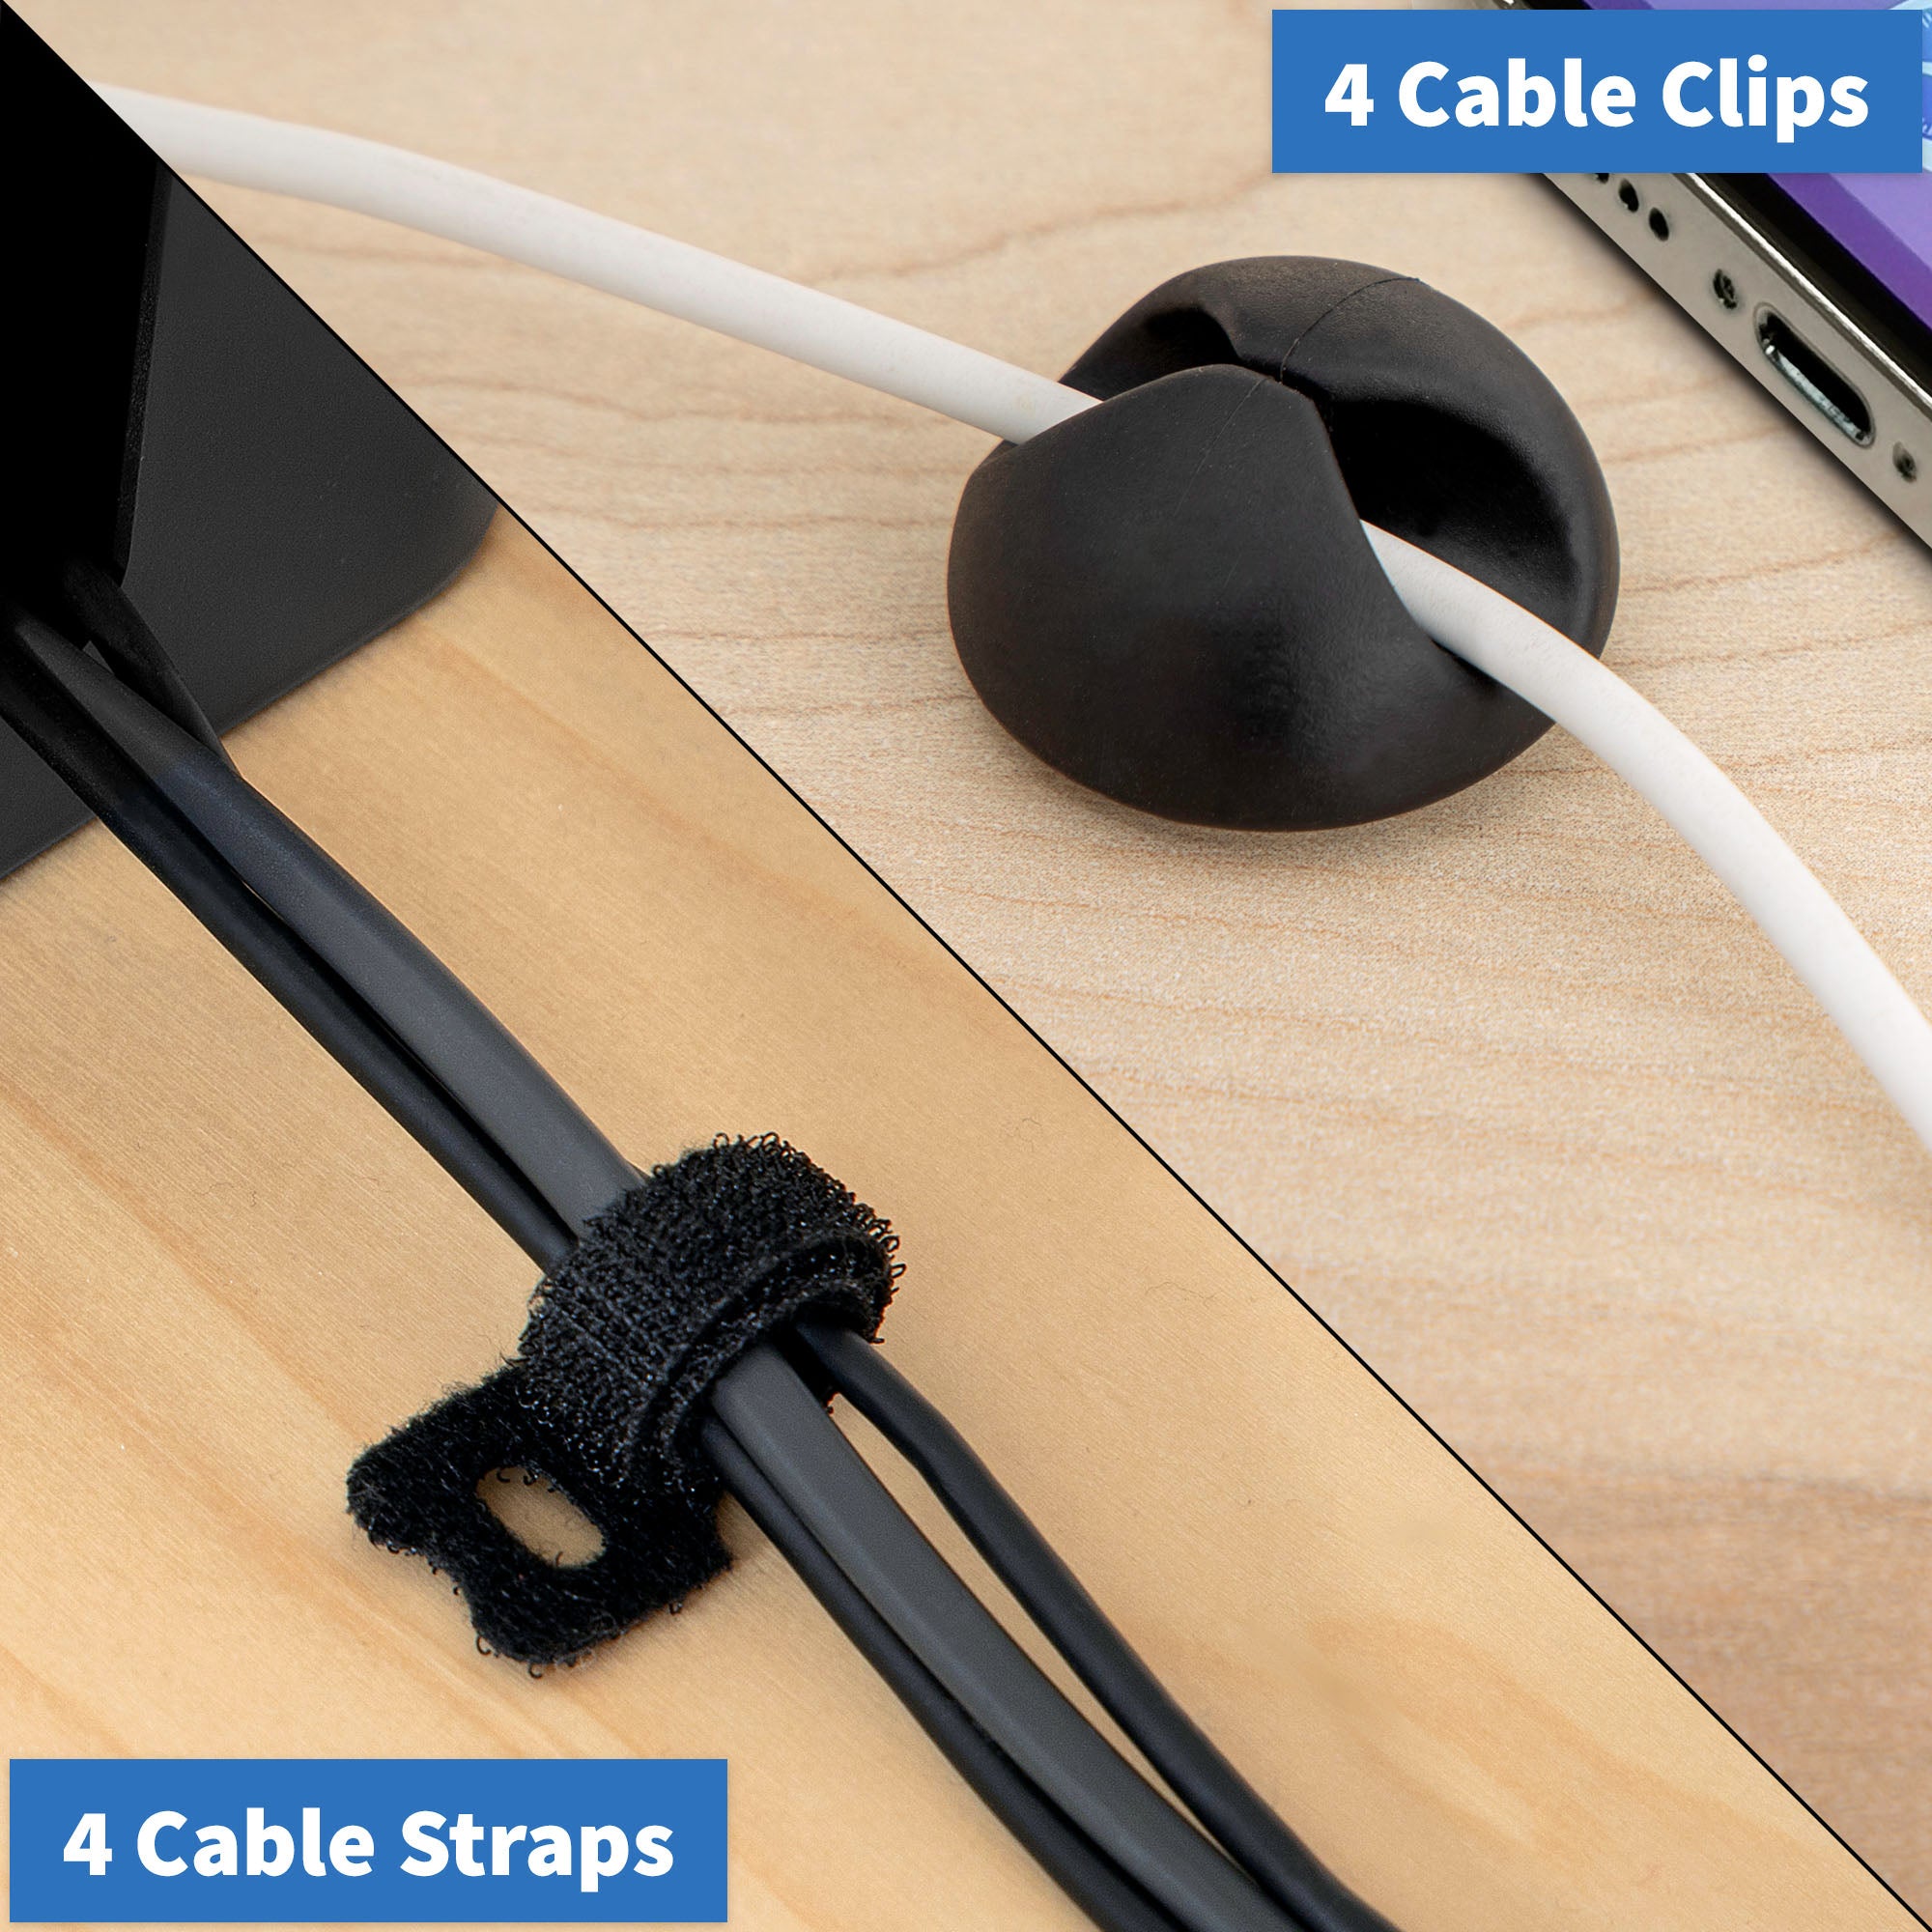 Best Way To Hide Cords, Power Strips and Plugs - Cable Management